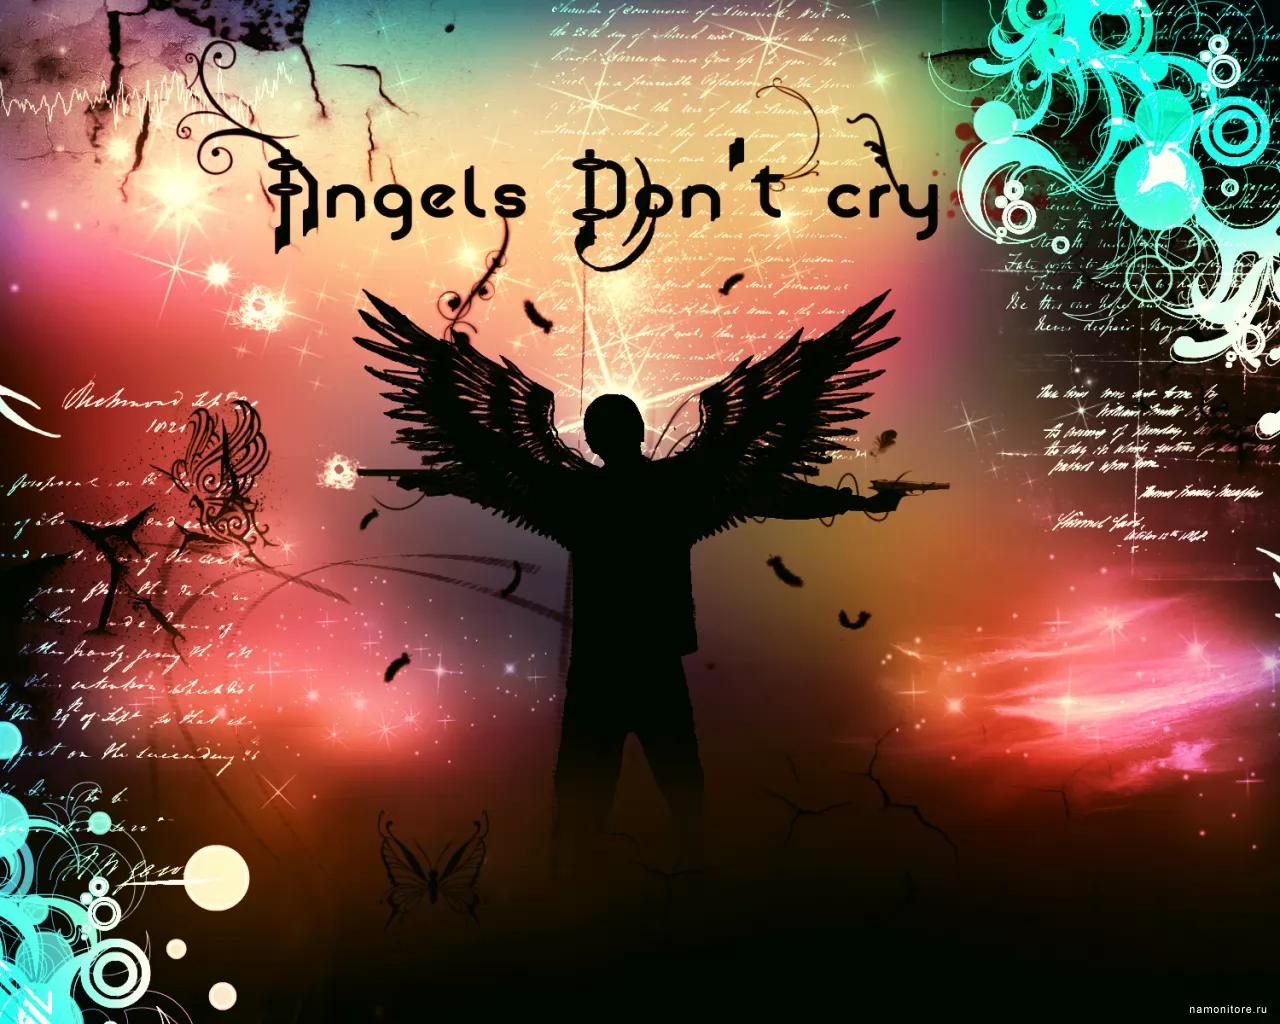 Angels Don&t Cry,  